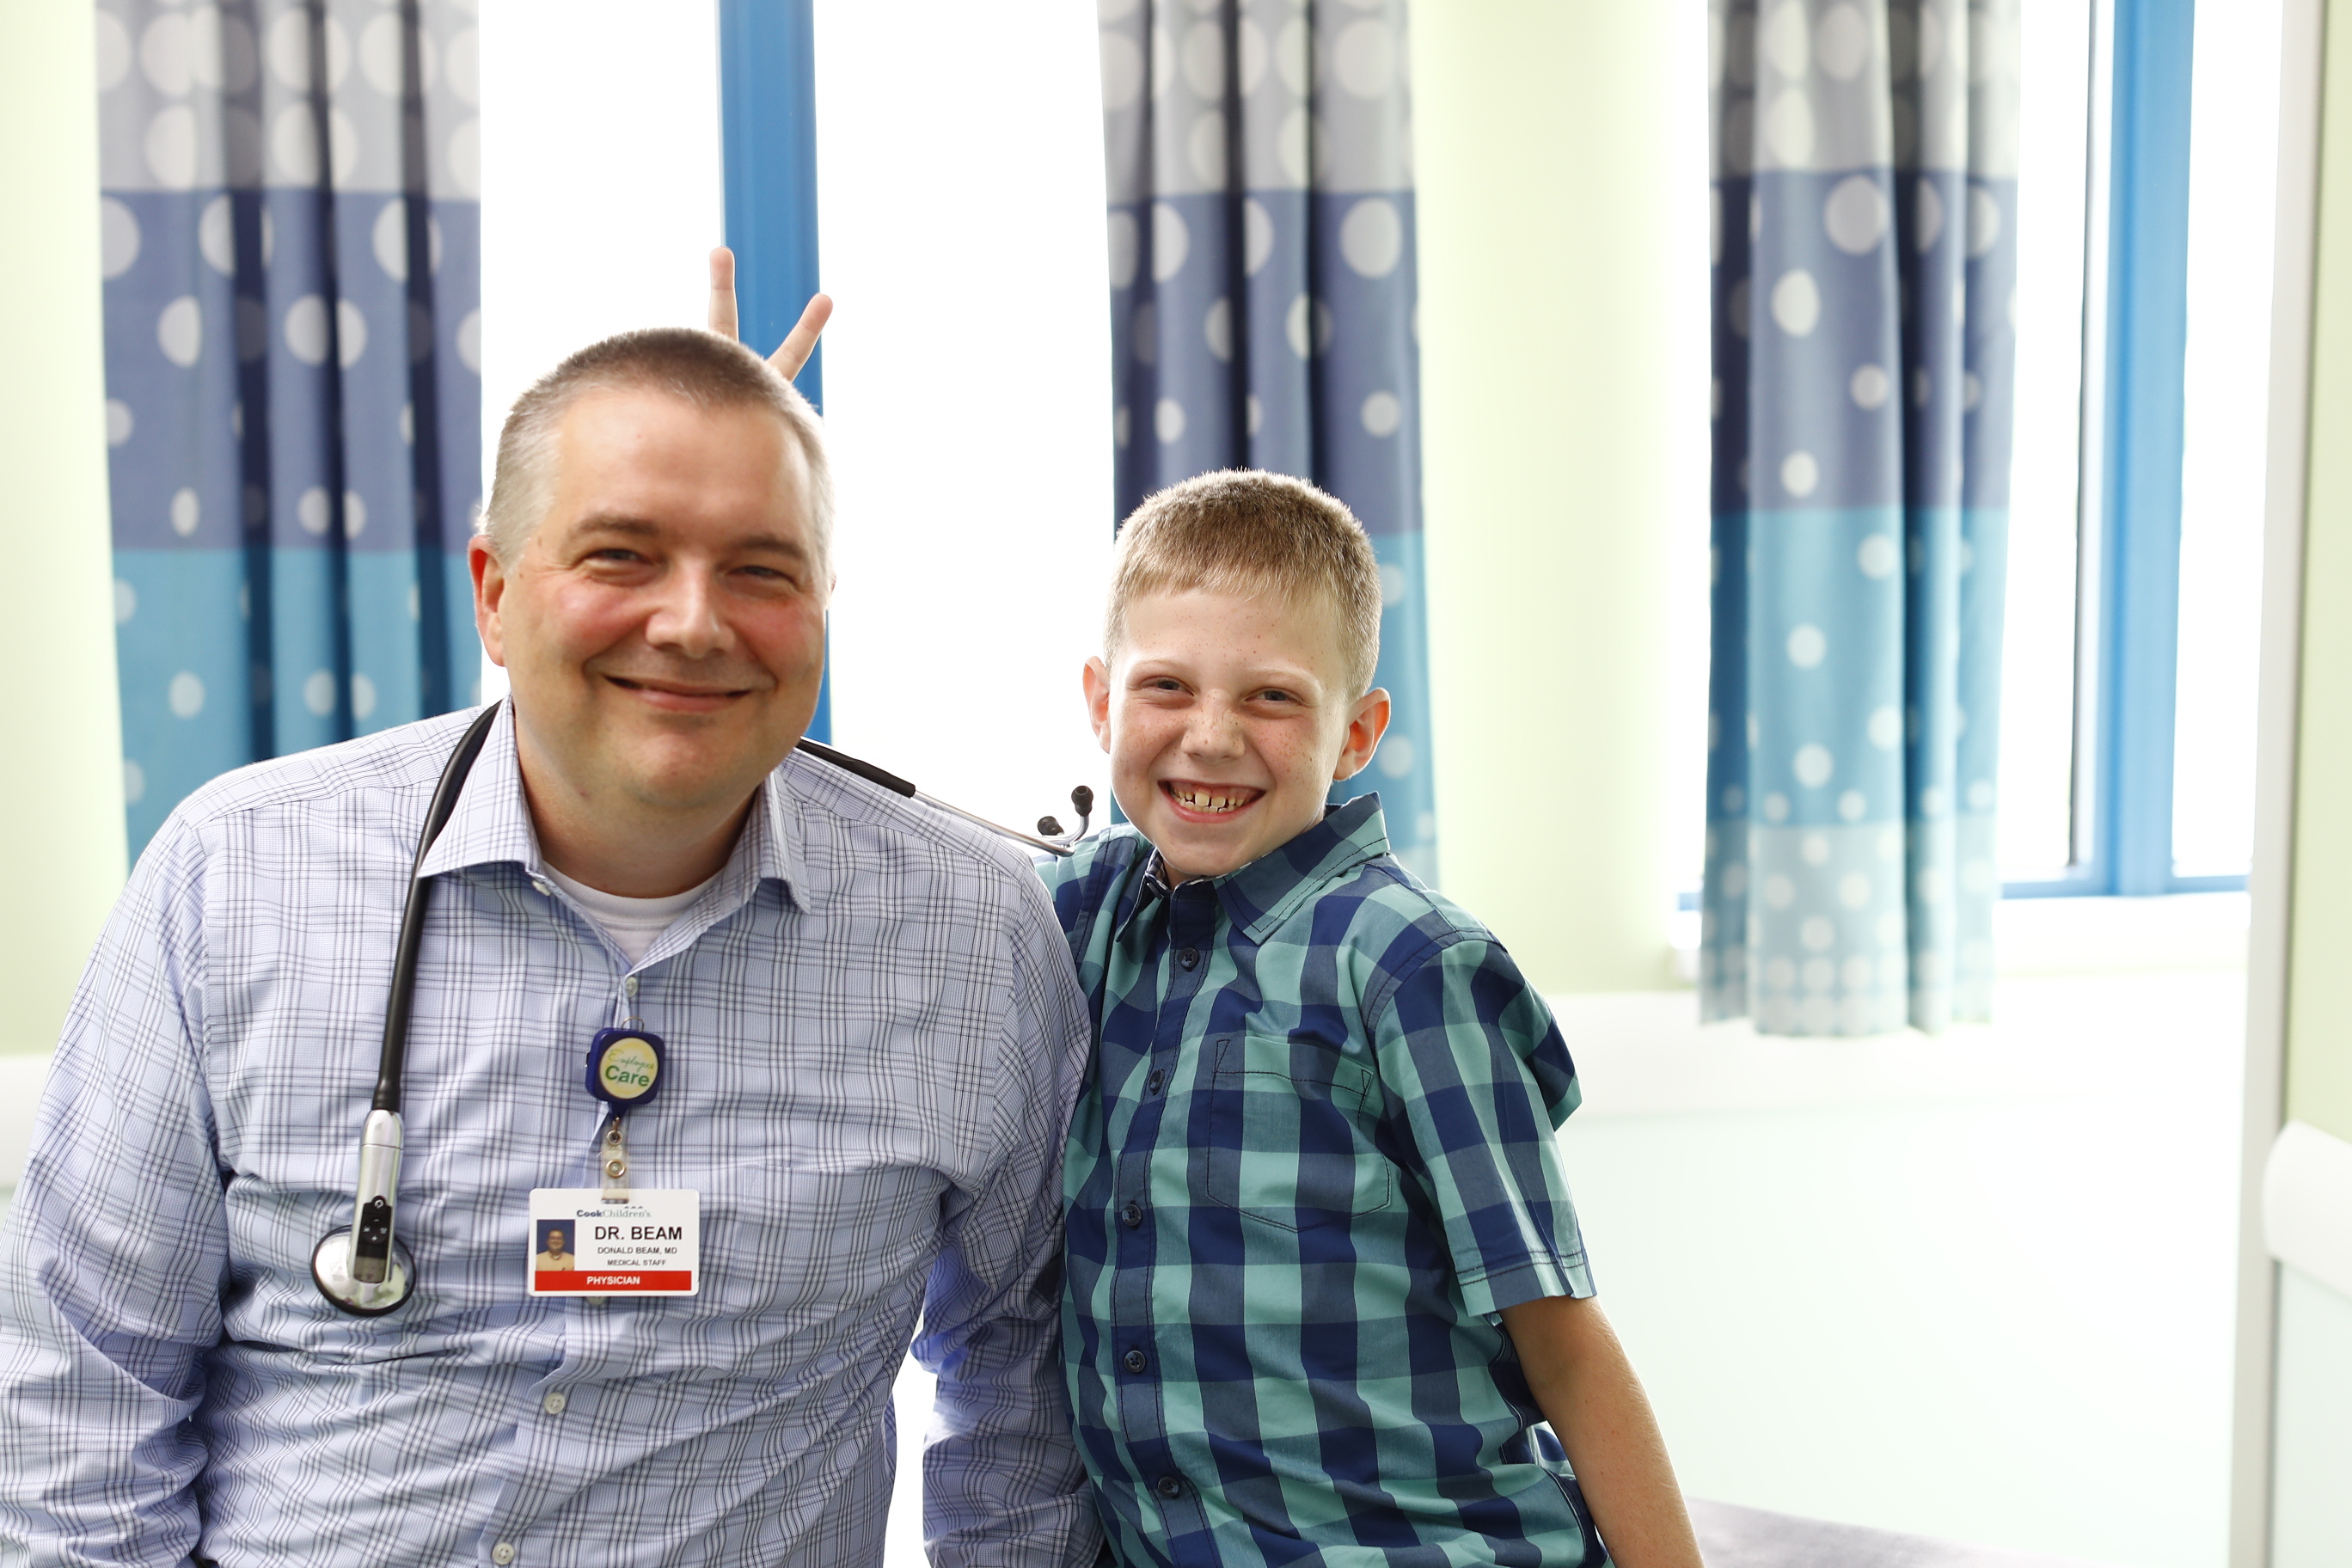 Dr. Beam with a patient in the Cook Children's Hematology and Oncology Clinic